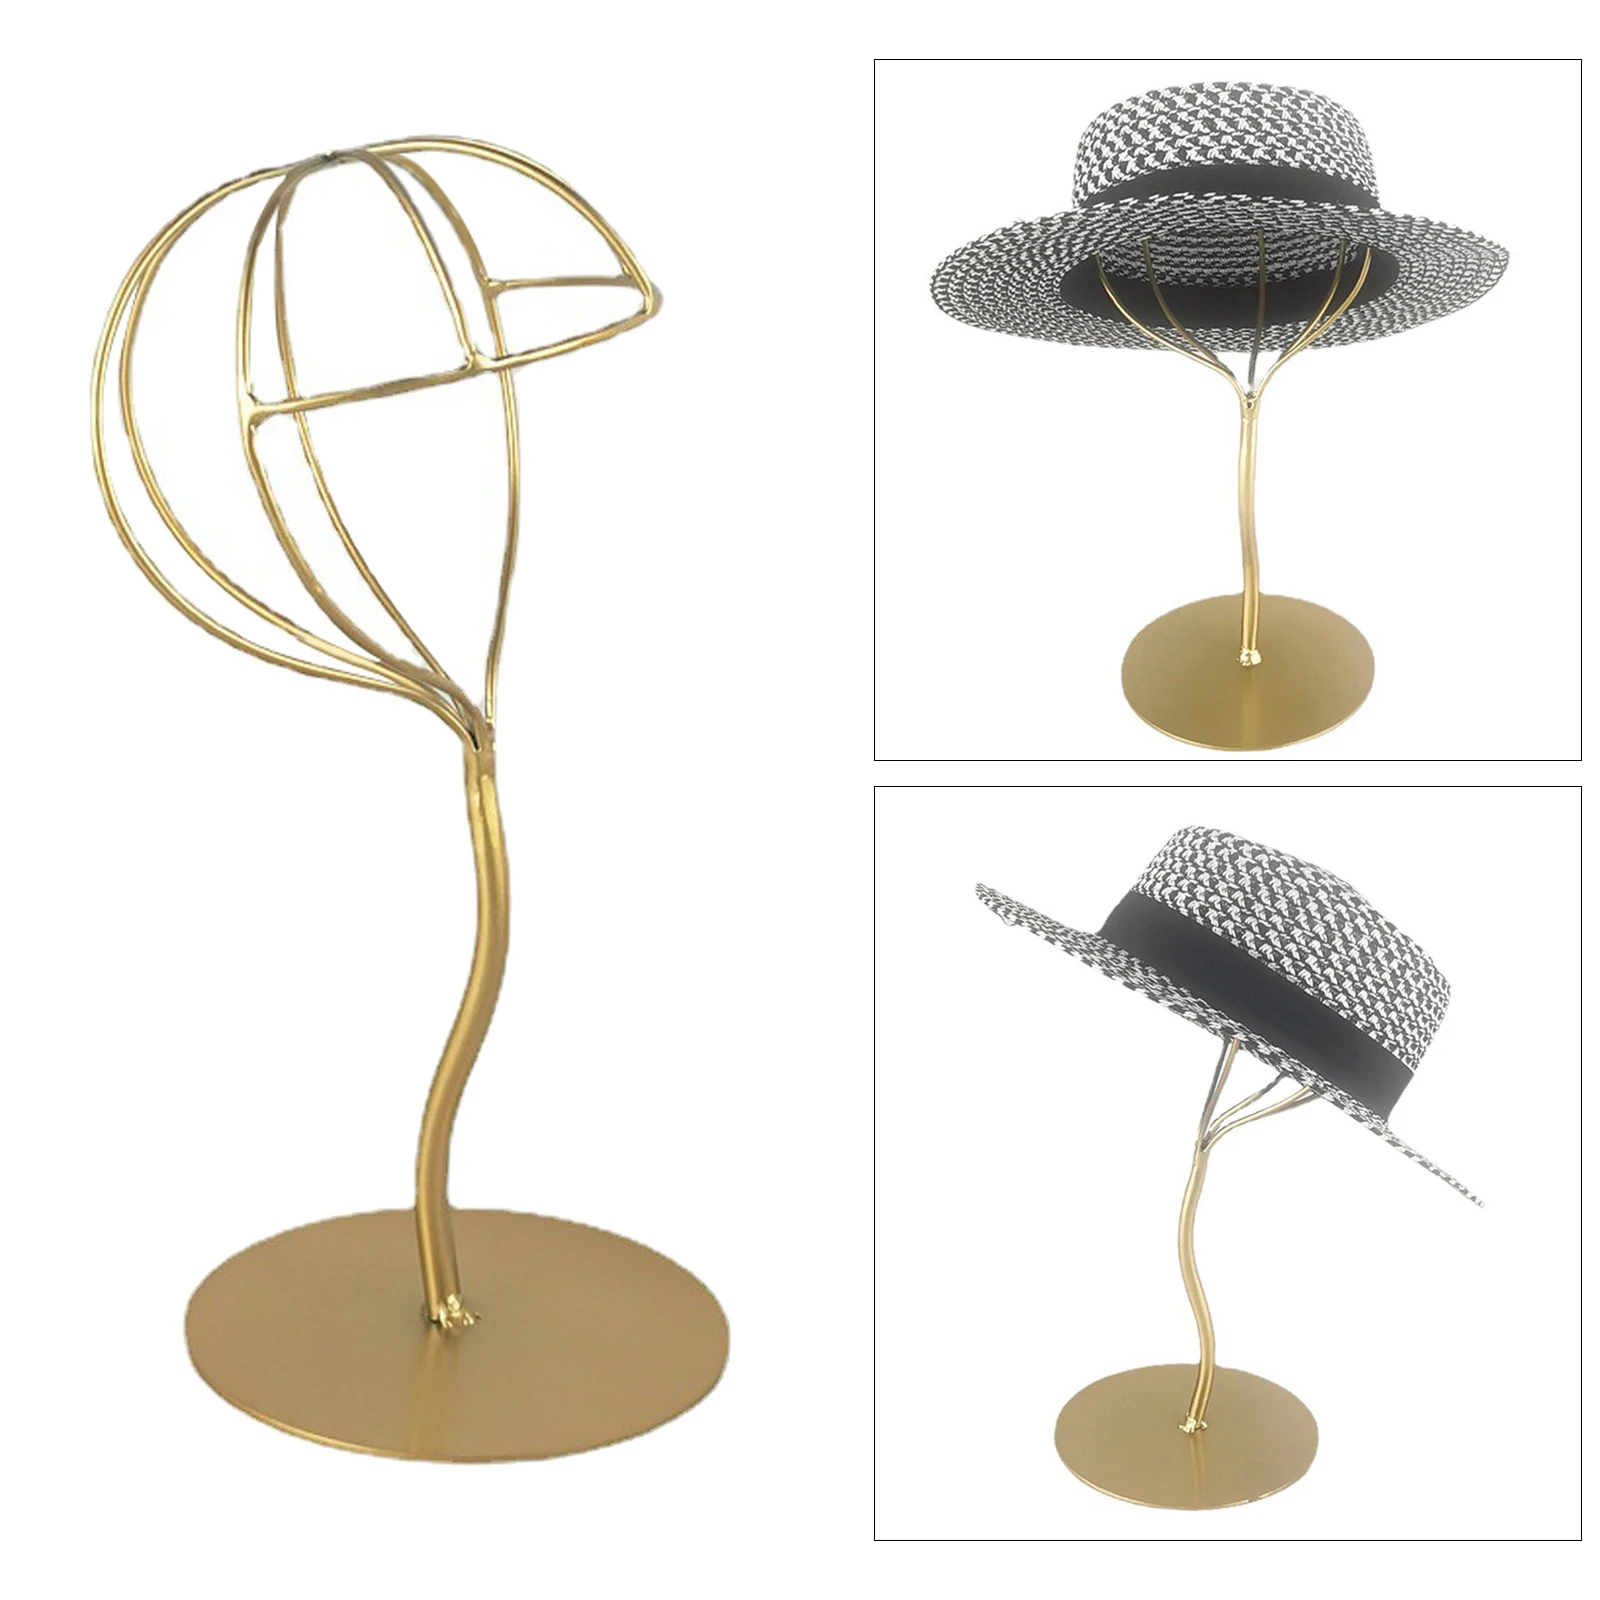 Elegant Stable Durable Metal Hat Holder Decorative Wig Styling Drying Fedora Display Stand Rack Organizer for Shop